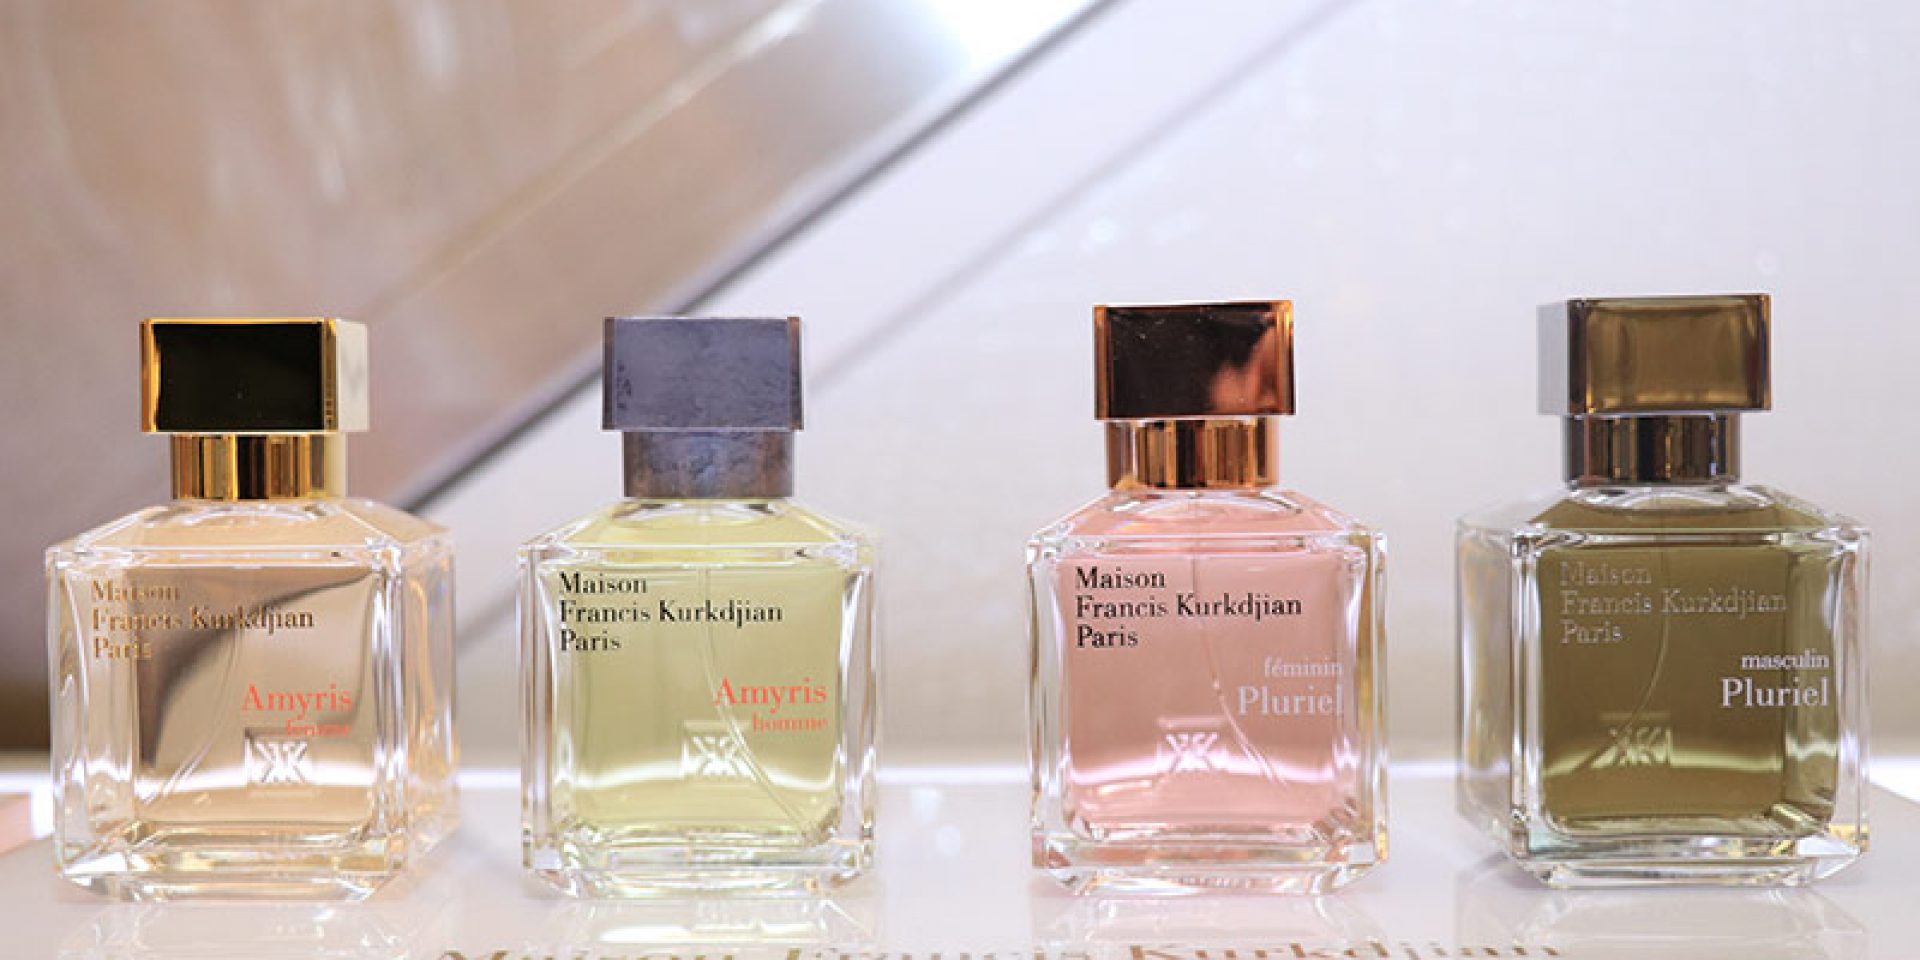 Private Launch Of Maison Francis Kurkdjian's Gentle Fluidity With